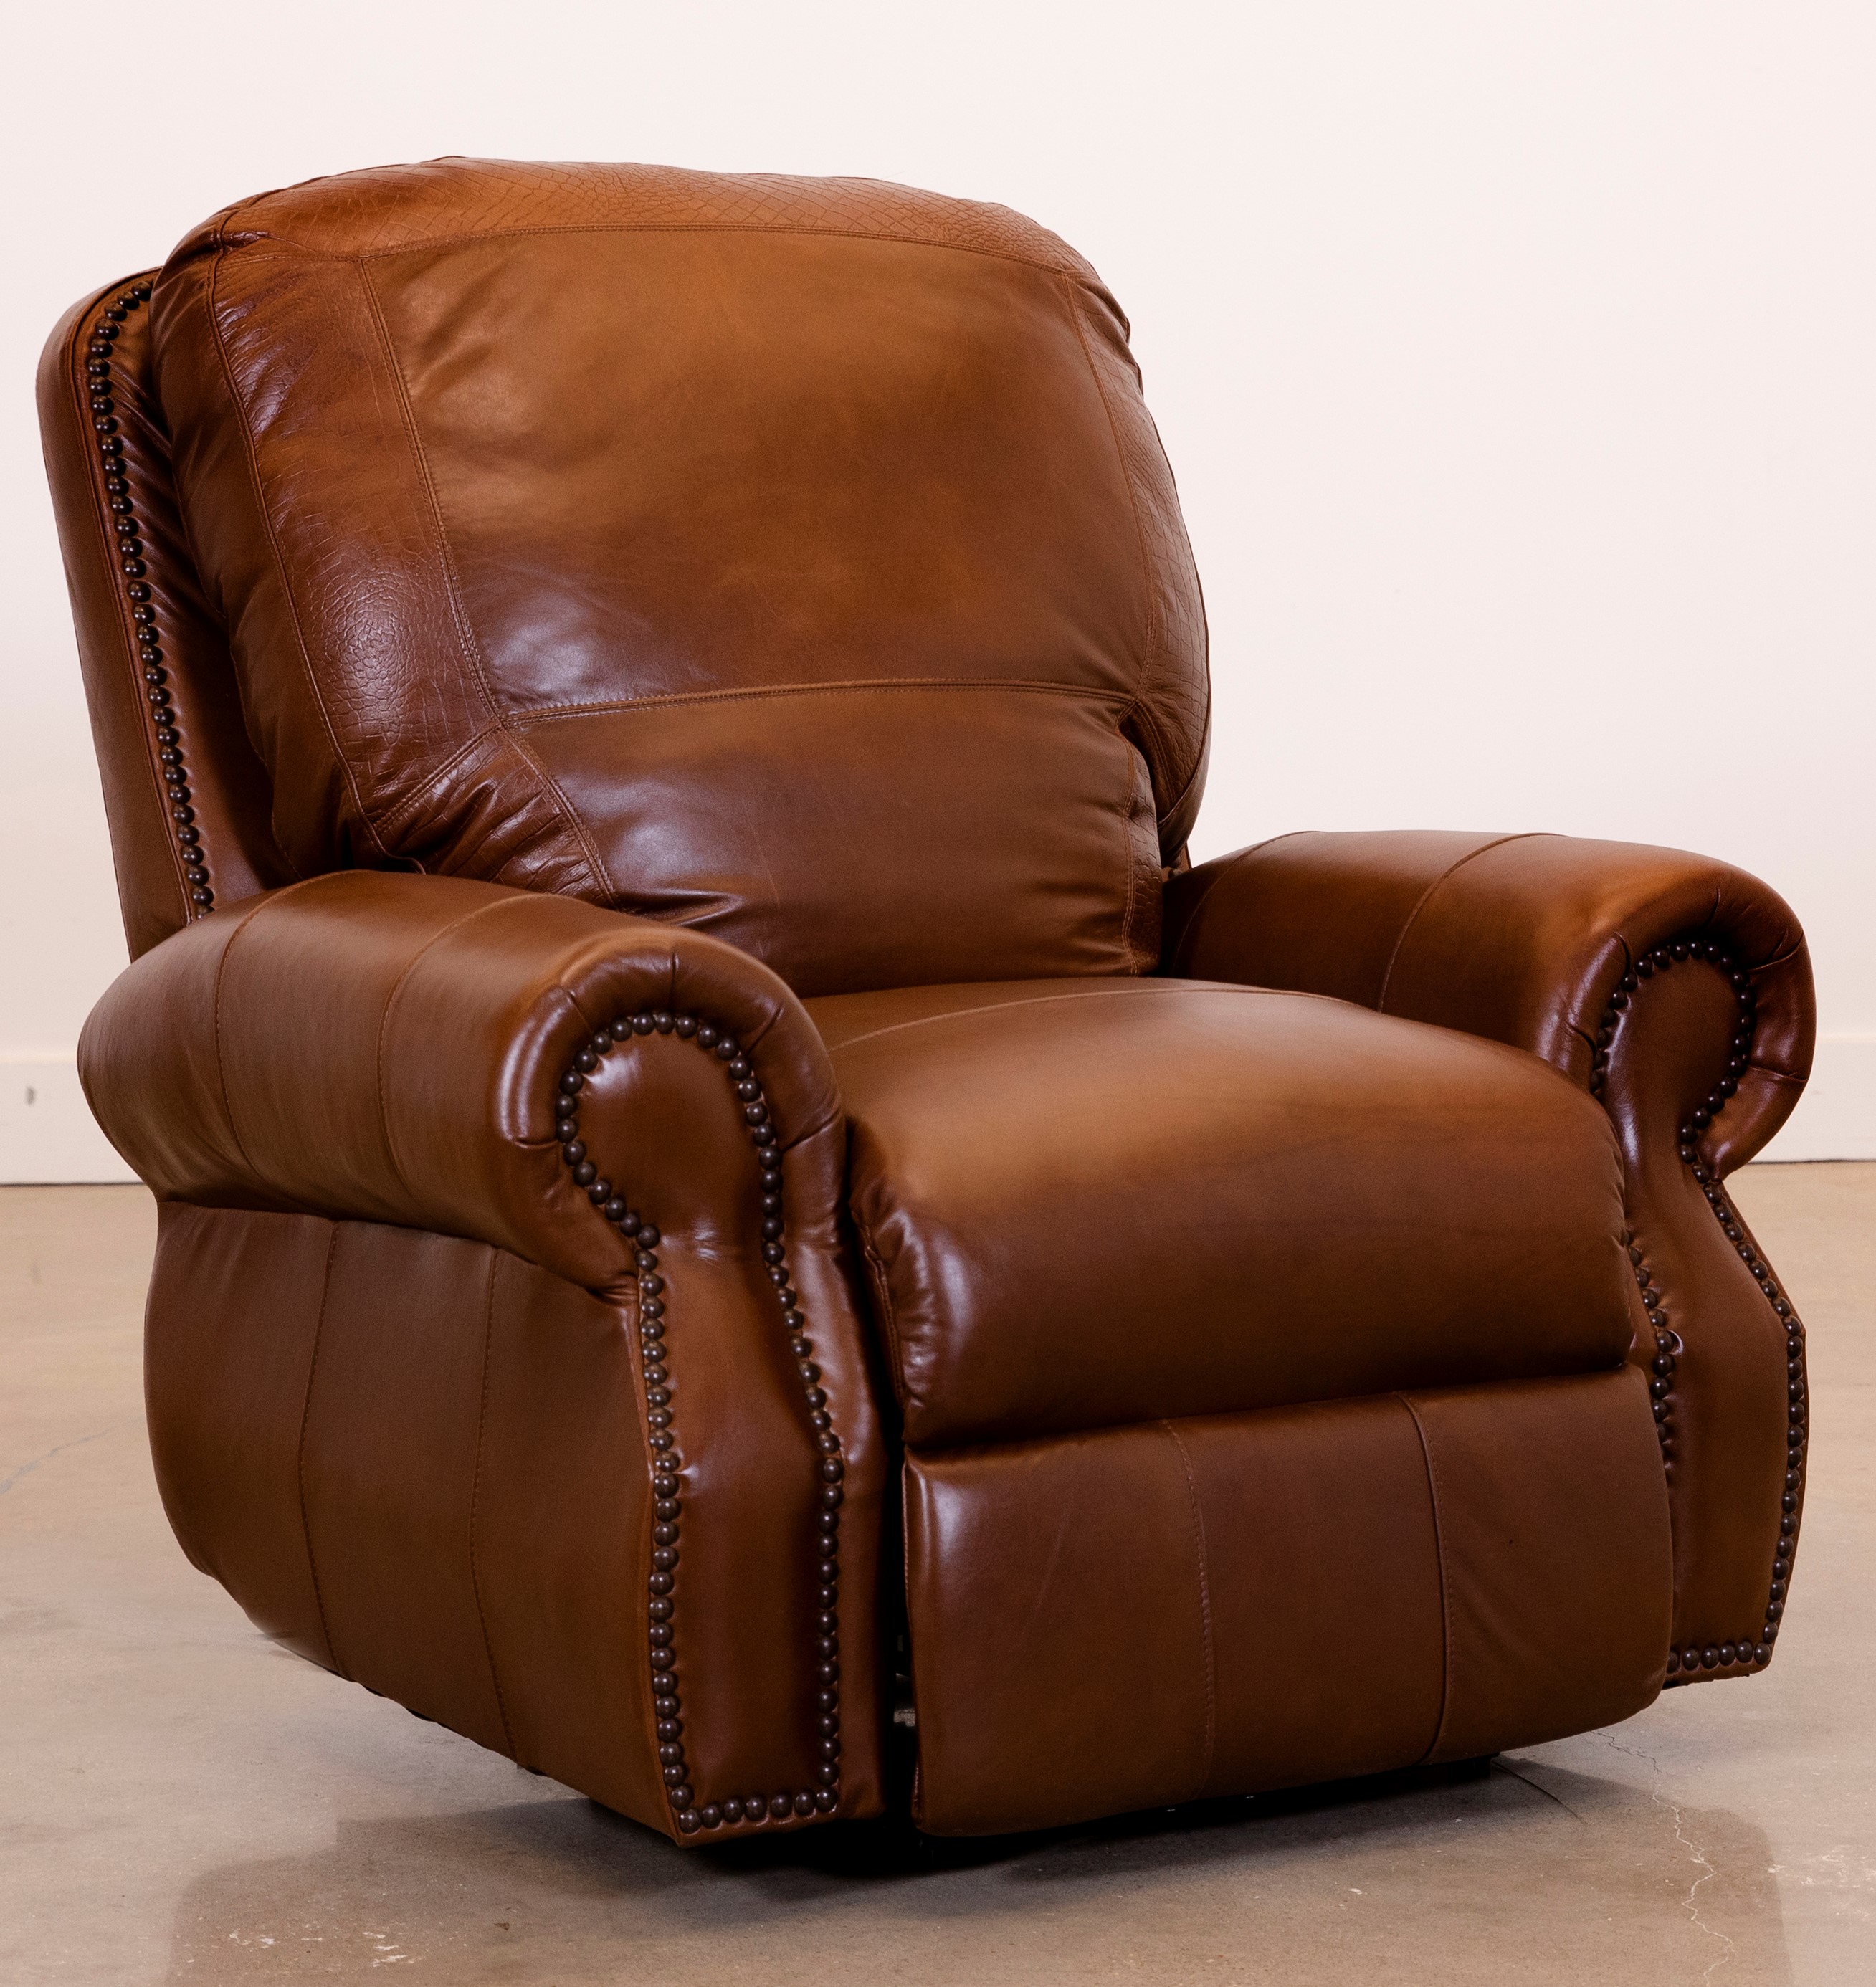 USA Premium Leather Furniture 9055 Brandy Gator All Leather Power Recliner